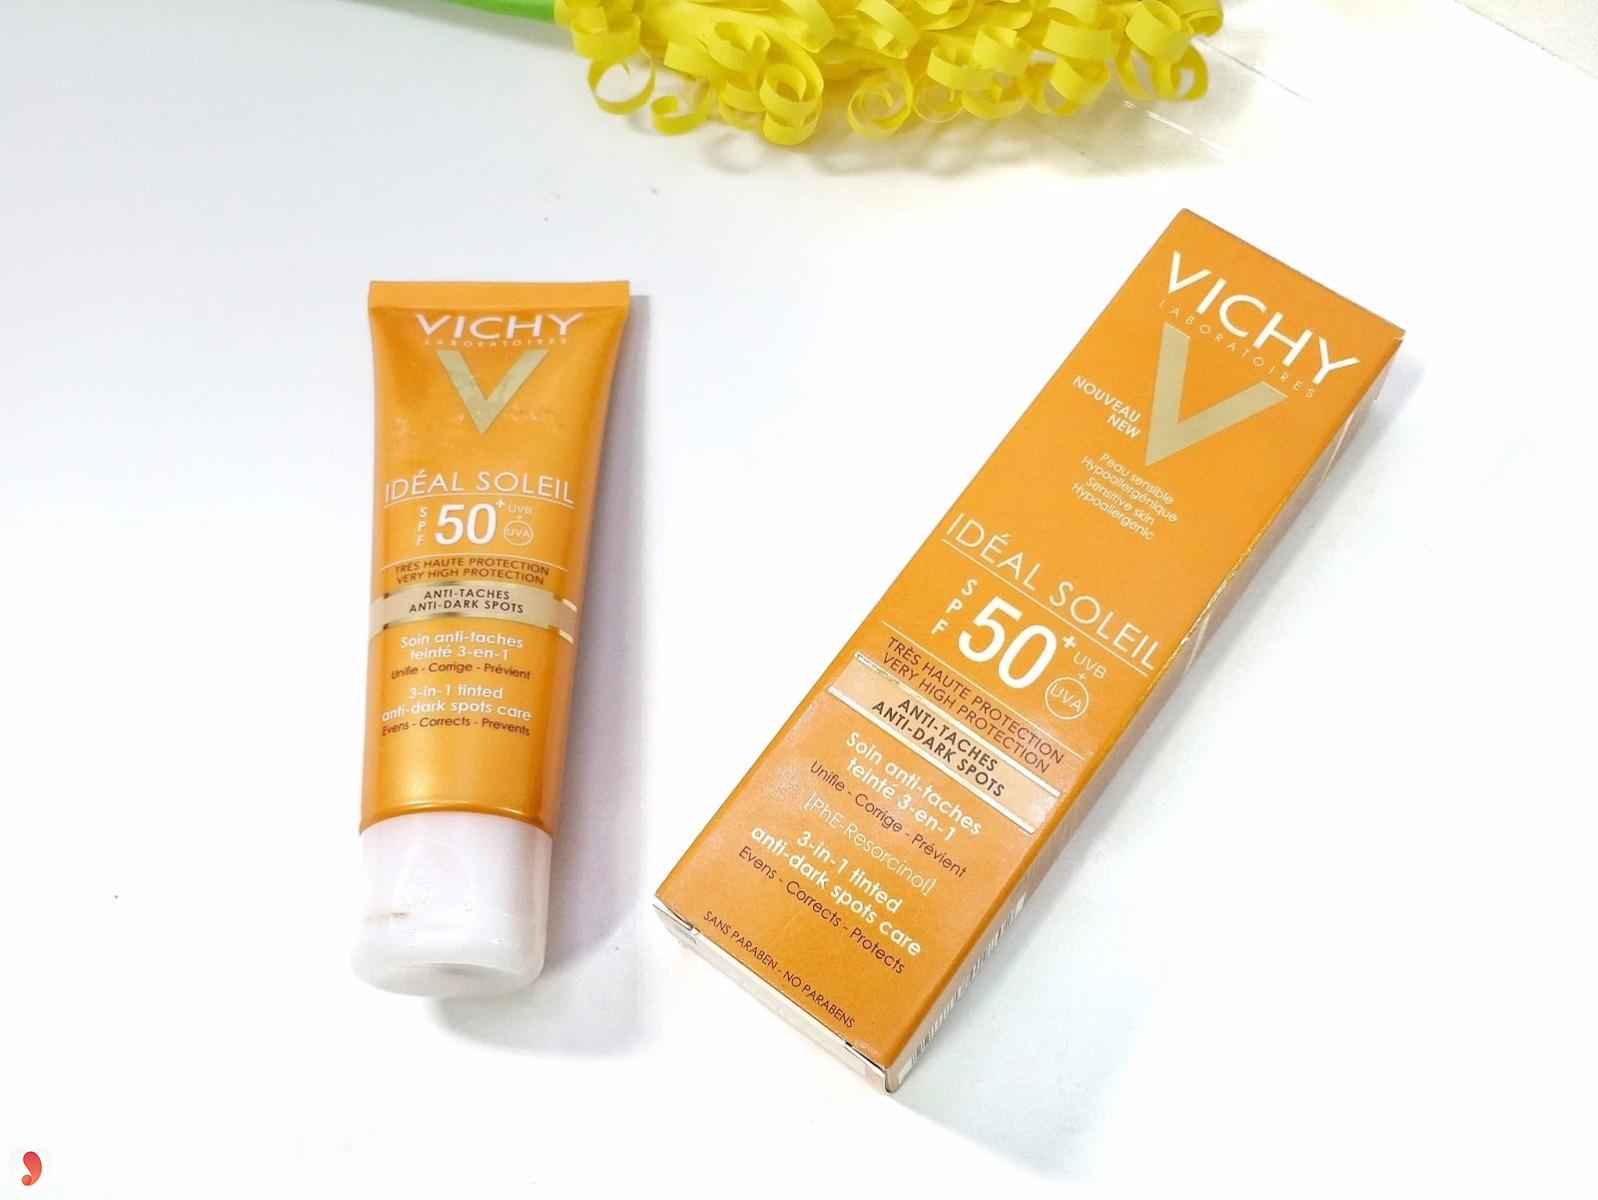 Kem chống nắng Vichy Ideal Soleil 3-in-1